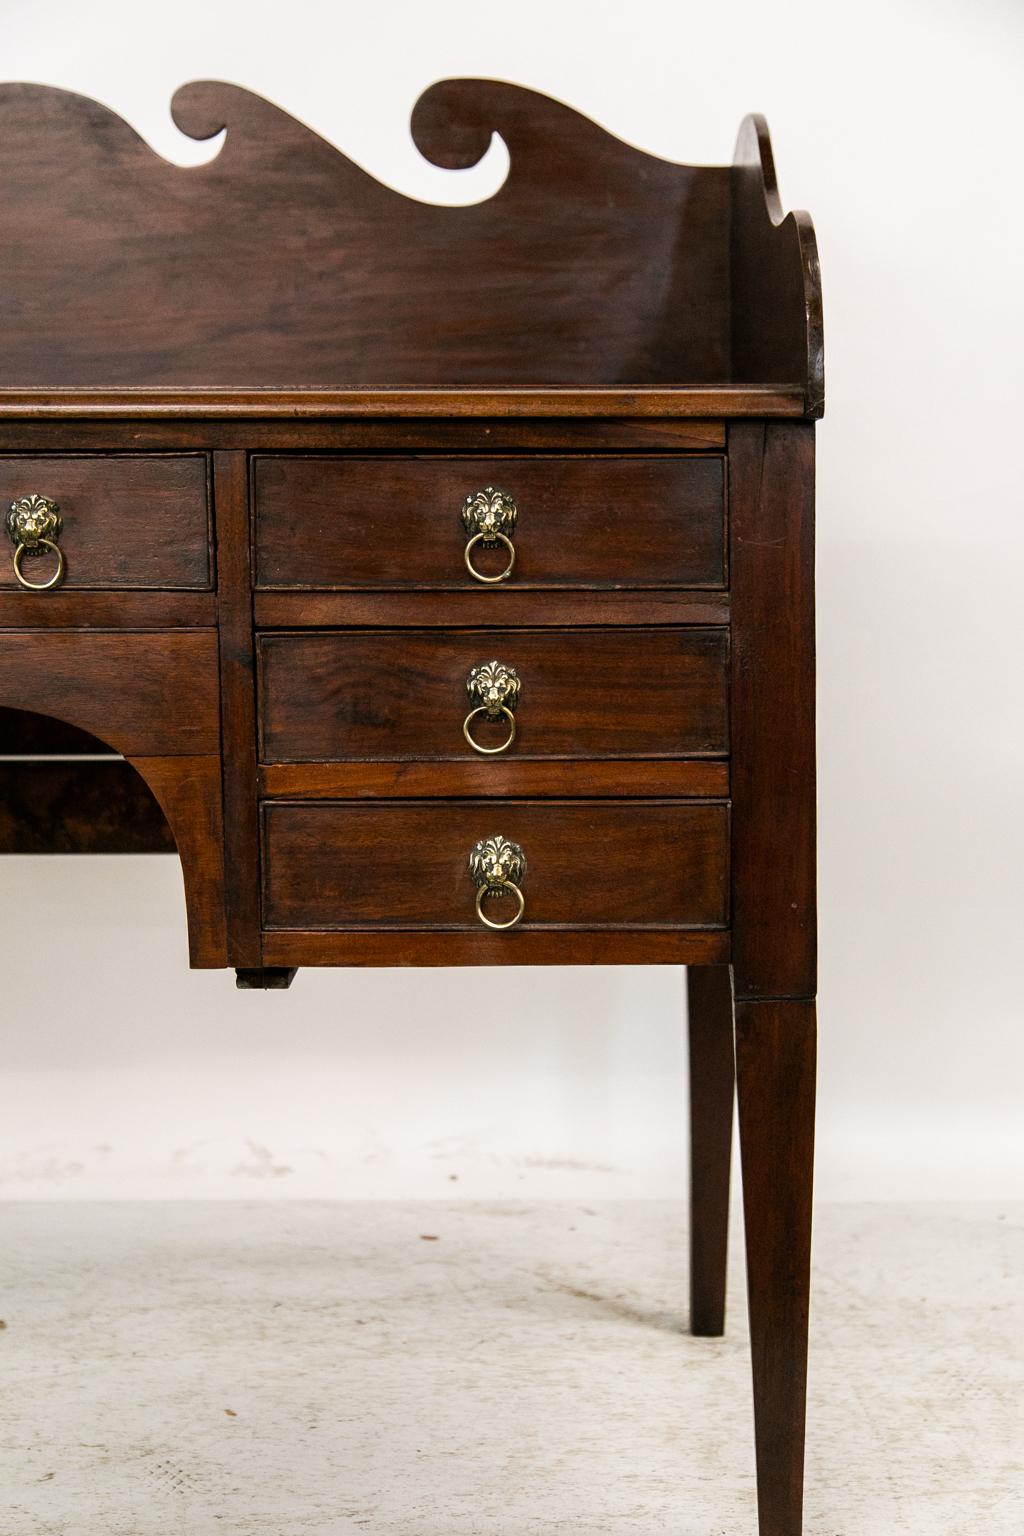 This buffet/server has a three-sided gallery and a shaped crest with a breaking wave motif. The top front edge has a bullnose molding above seven drawers with the original lion's head pulls. The center has an arched apron supporting the middle